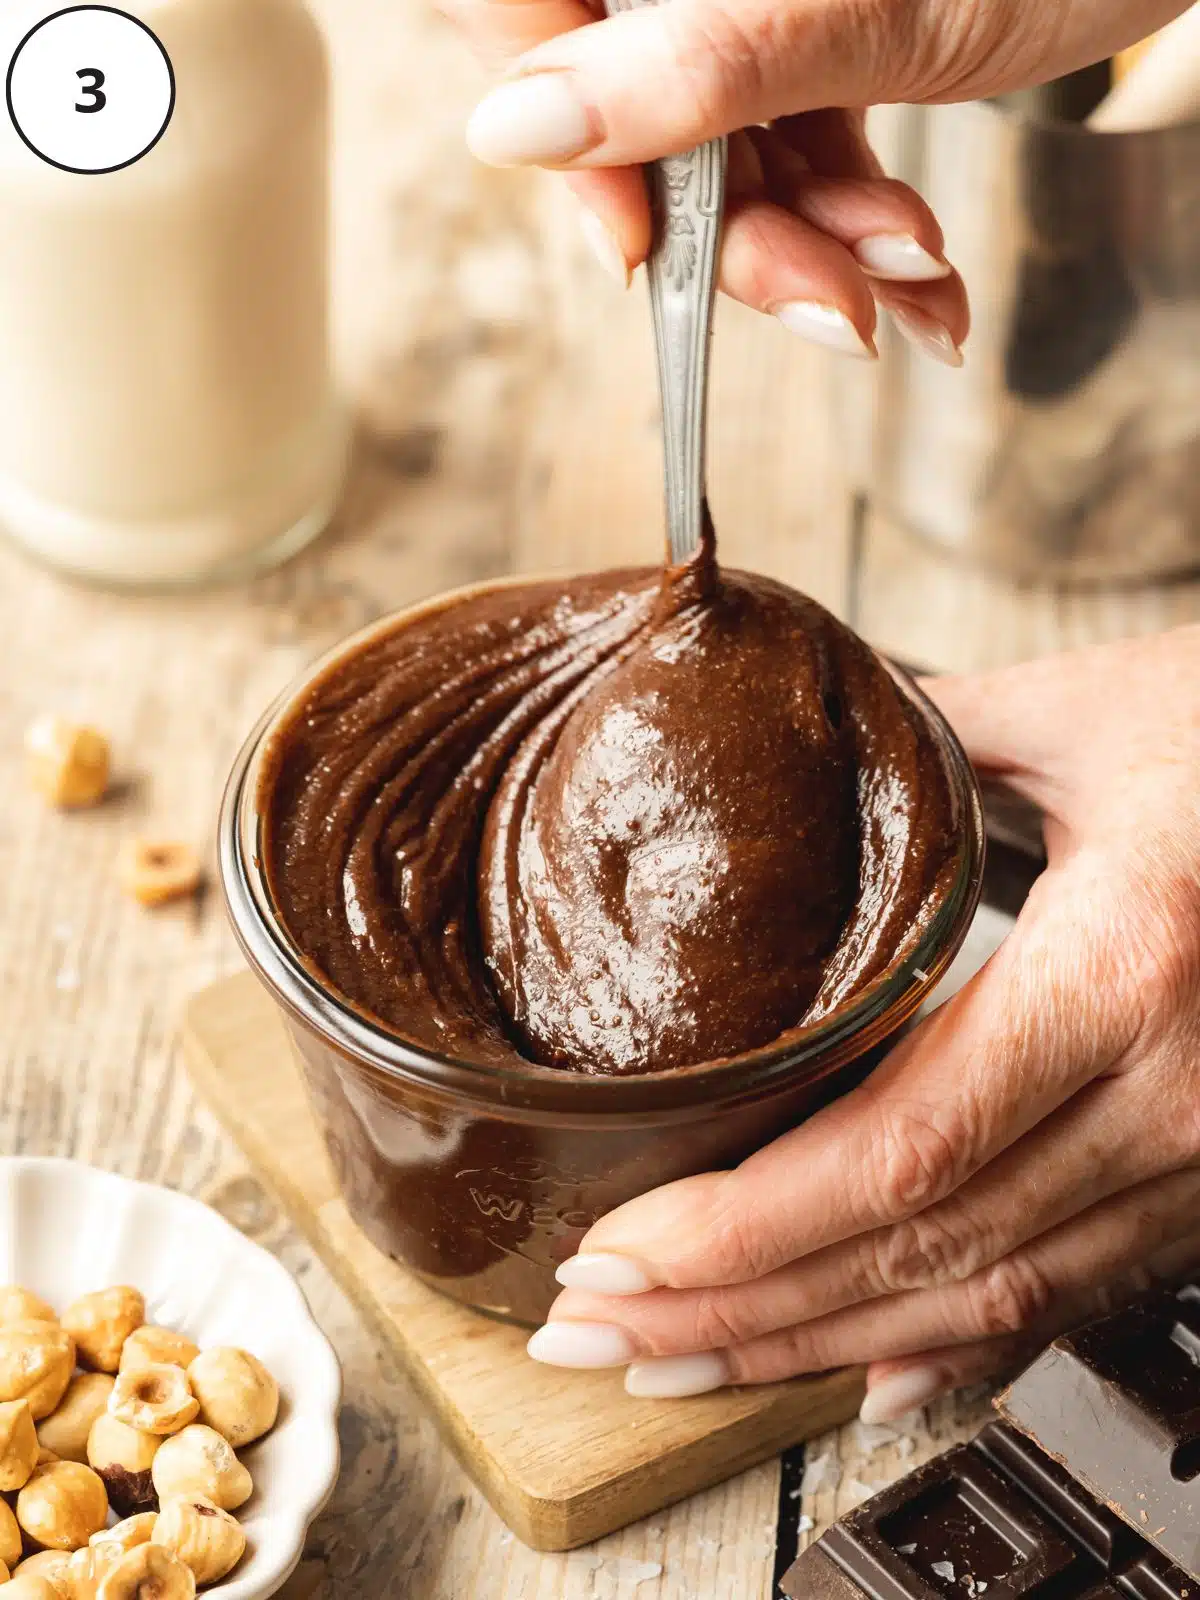 Woman’s hands doling out a spoon of vegan nutella from the glass jar.